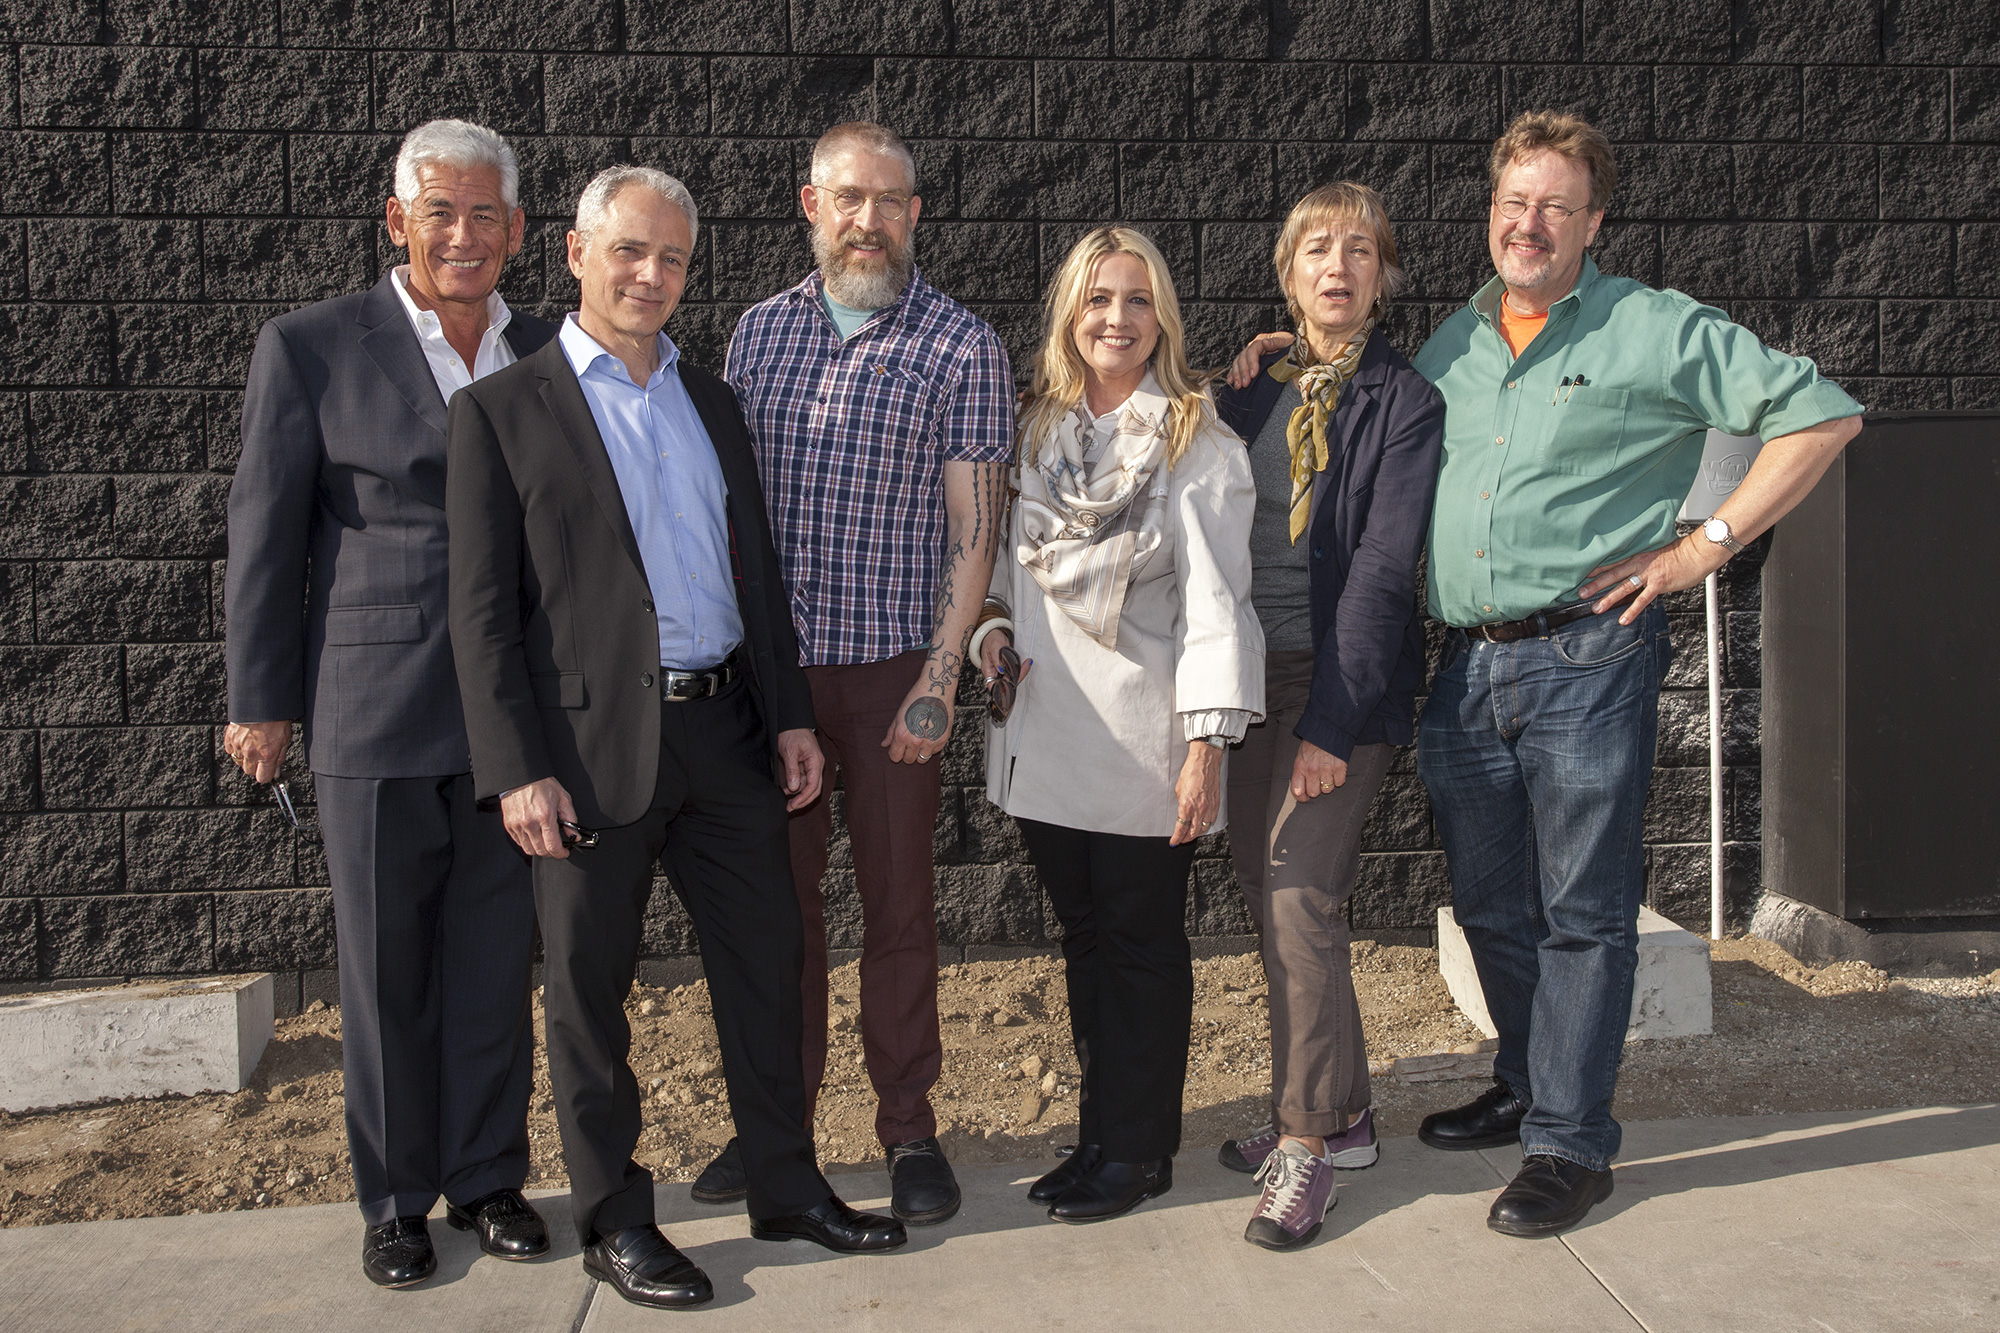 George Falardeau, Lorne Buchman, Aaron Smith, Ann Field, Vanalyne Green, and Tom Knechtel at the 870 opening party